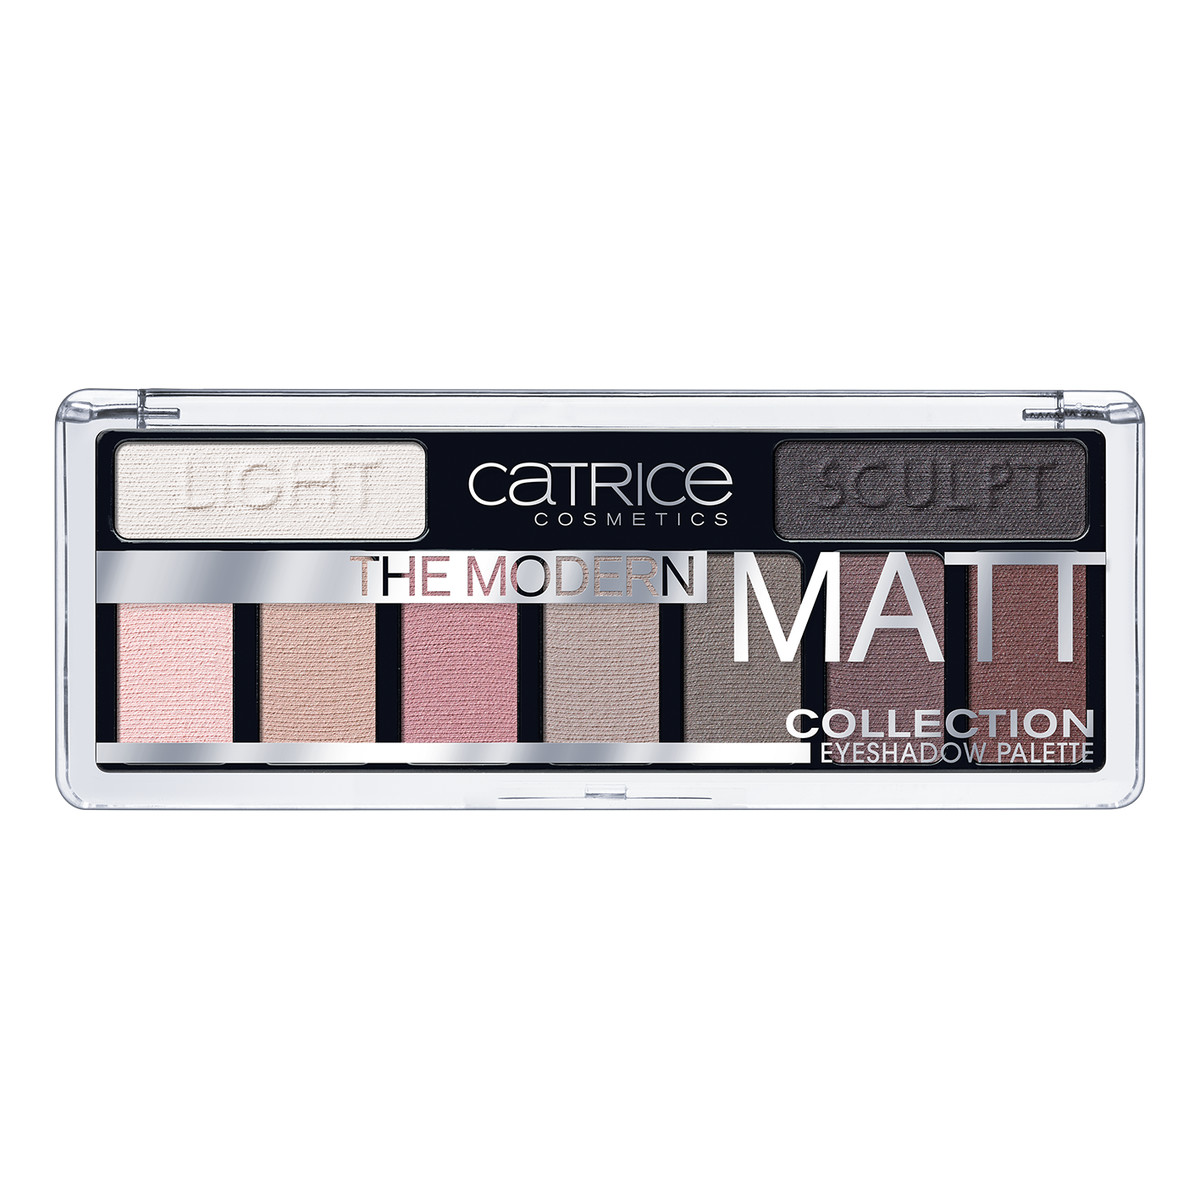 Catrice The Modern Matt Collection Eyeshadow Palette Paletka Pudrowych Cieni